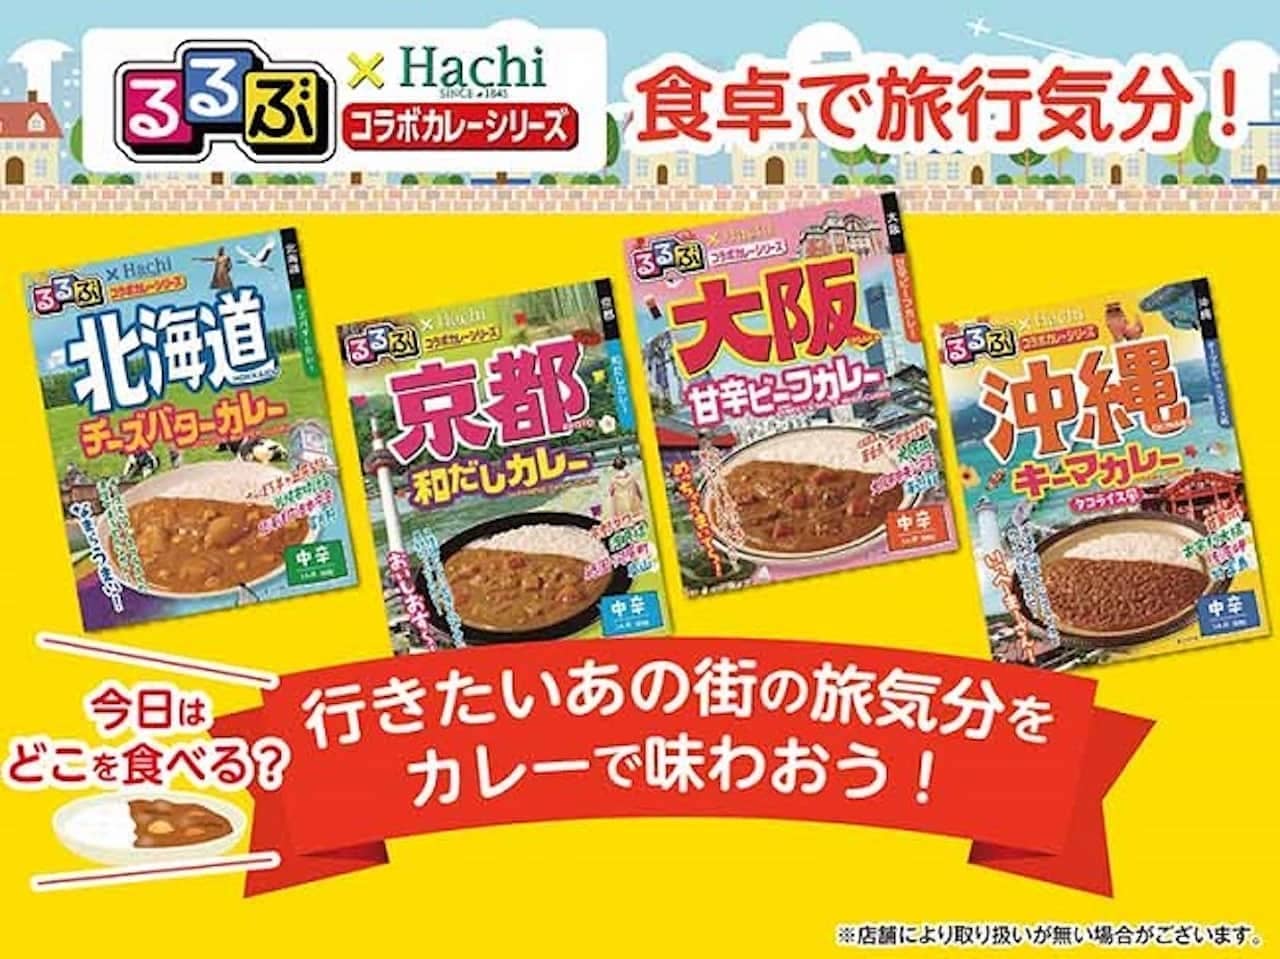 Lawson Store 100 "Local Curry" Rurubu x Hachi Foods Collaboration Curry